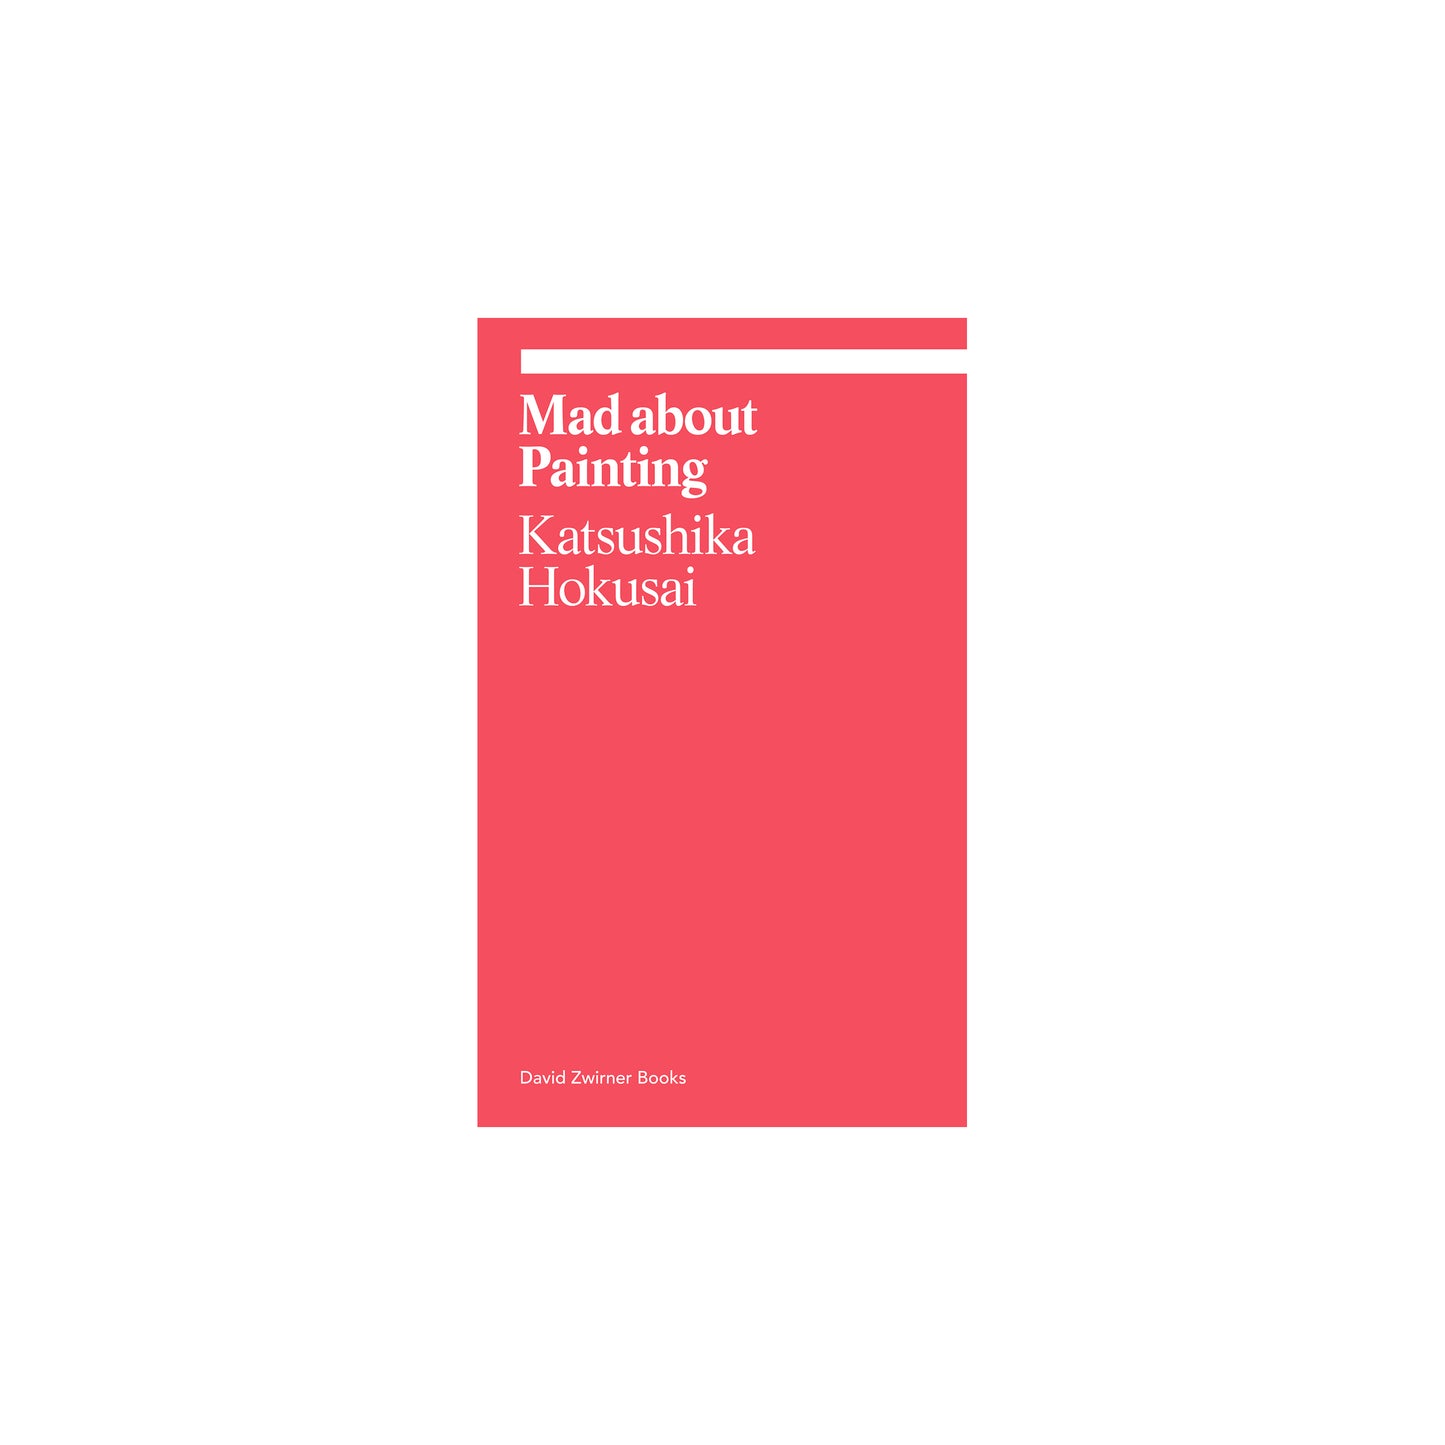 Mad about Painting Book (ekphrasis)